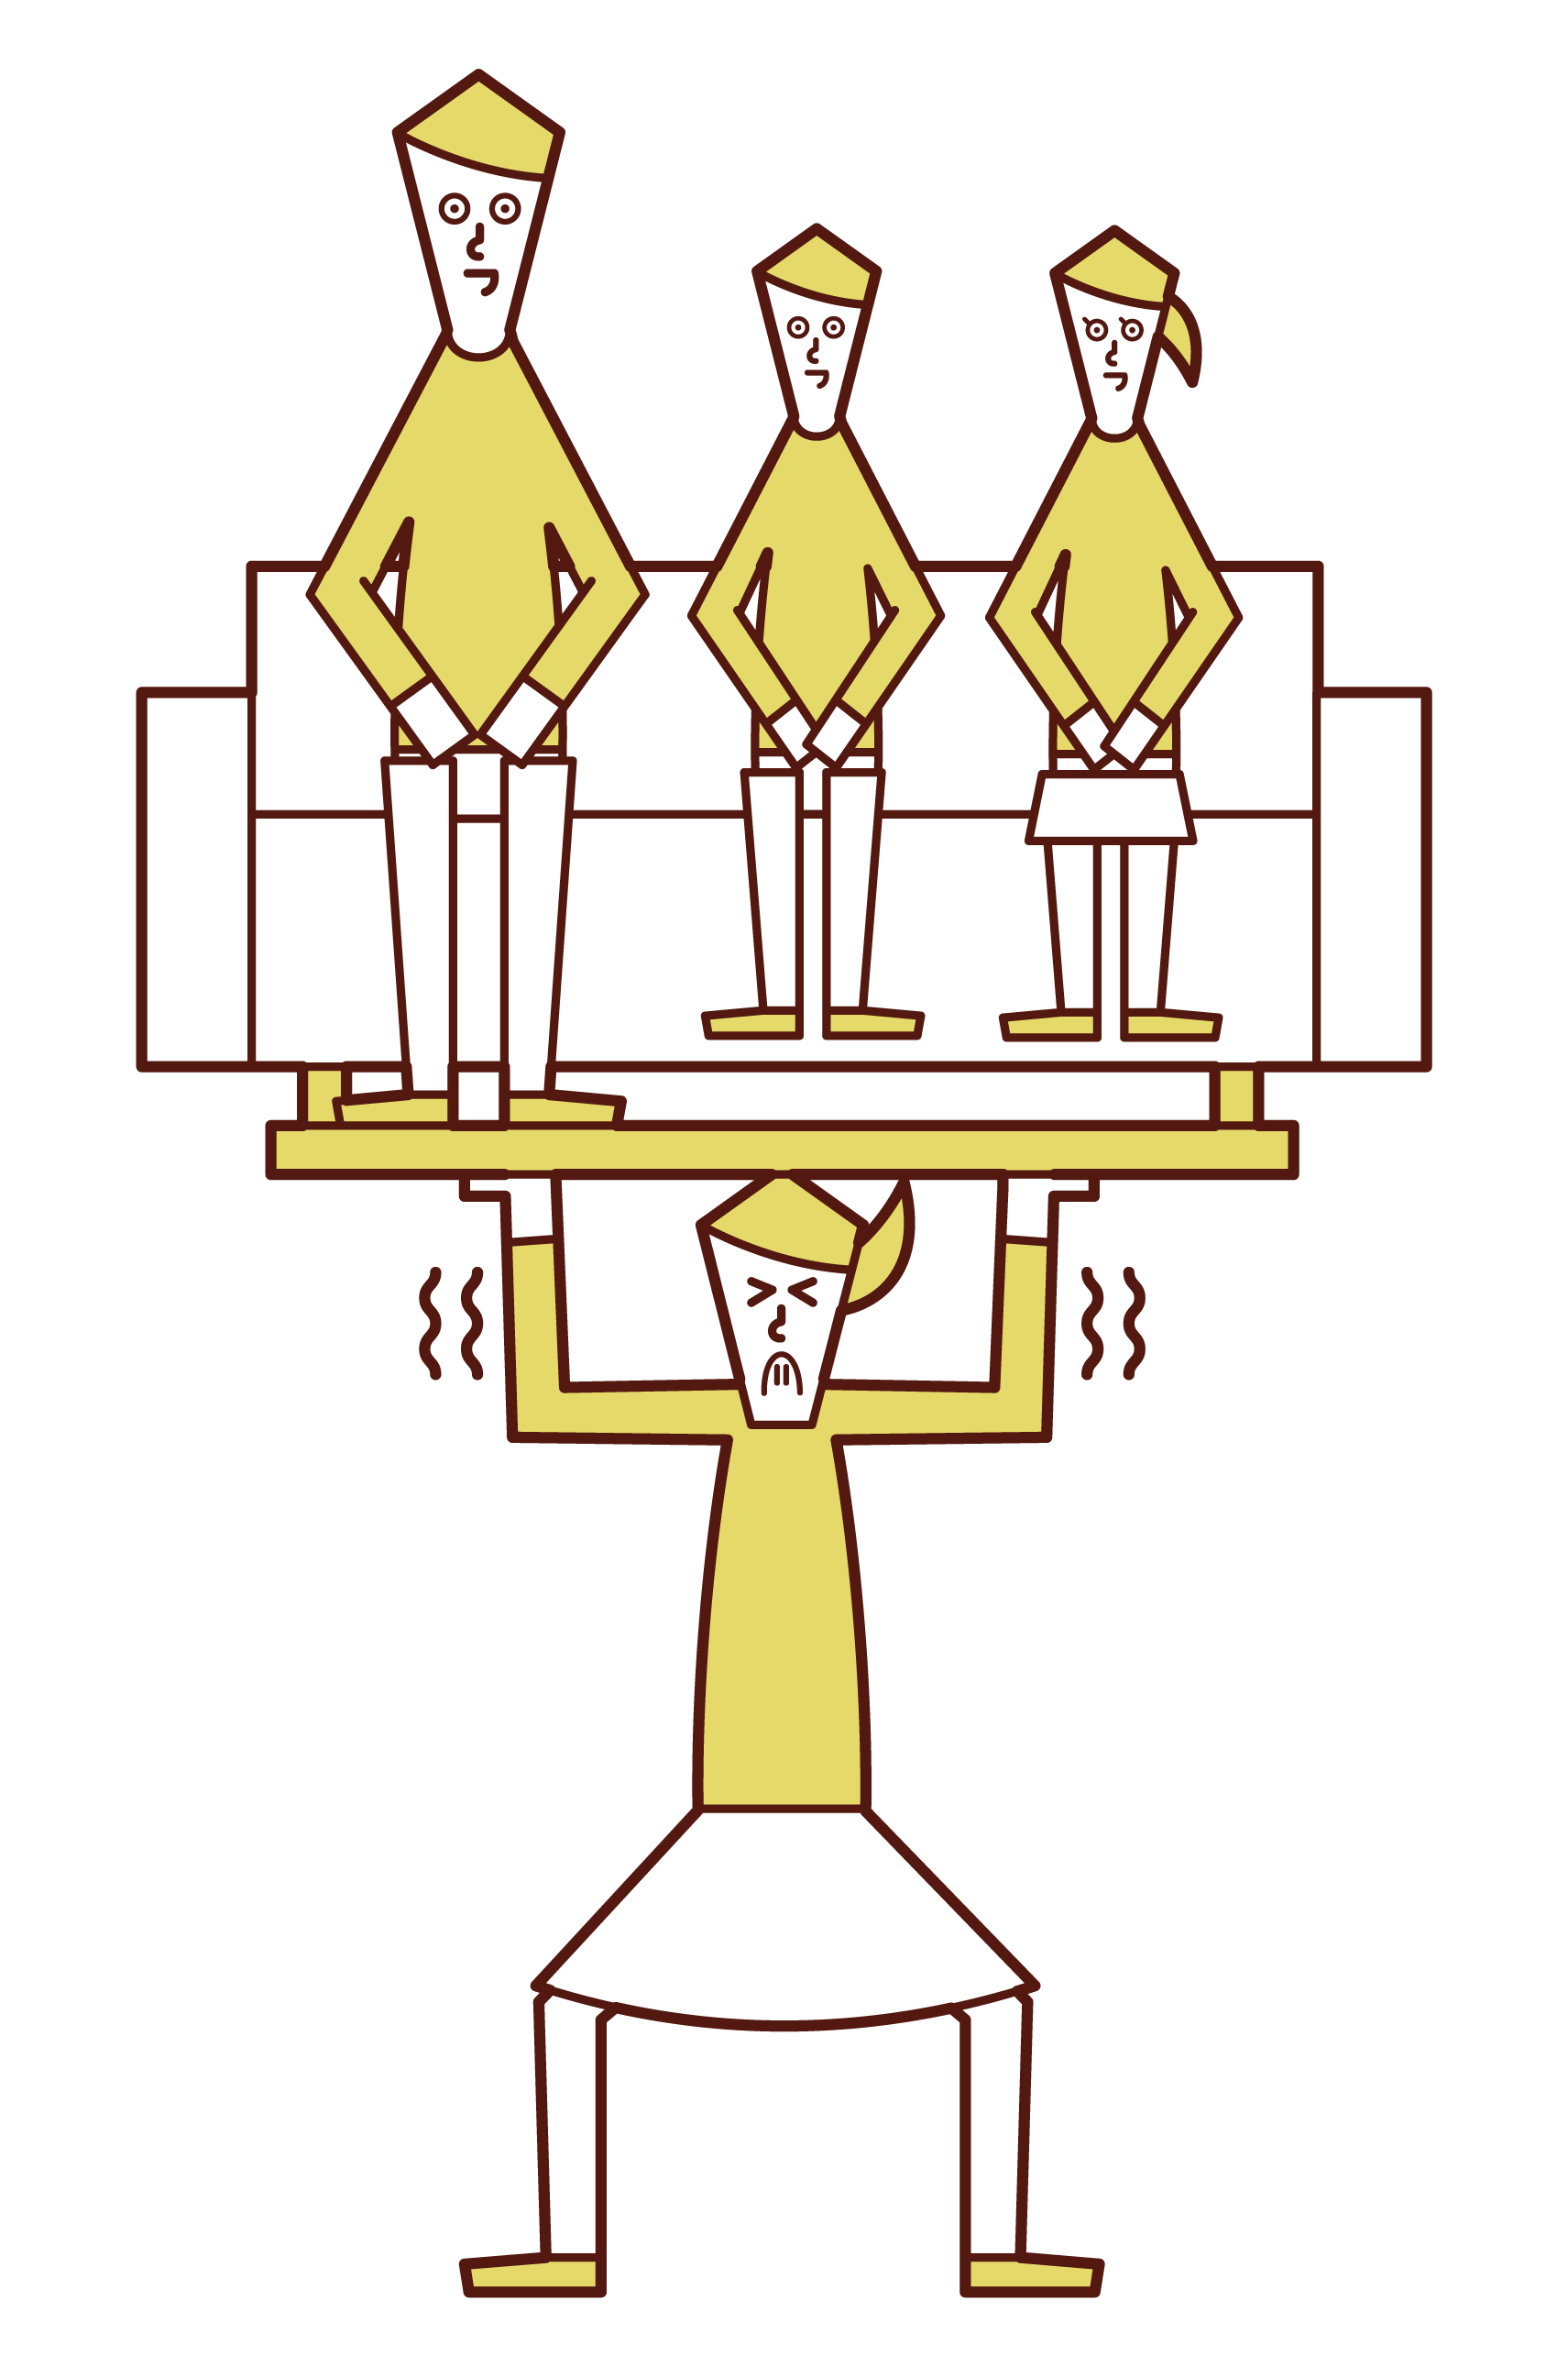 Illustration of a woman who supports a family